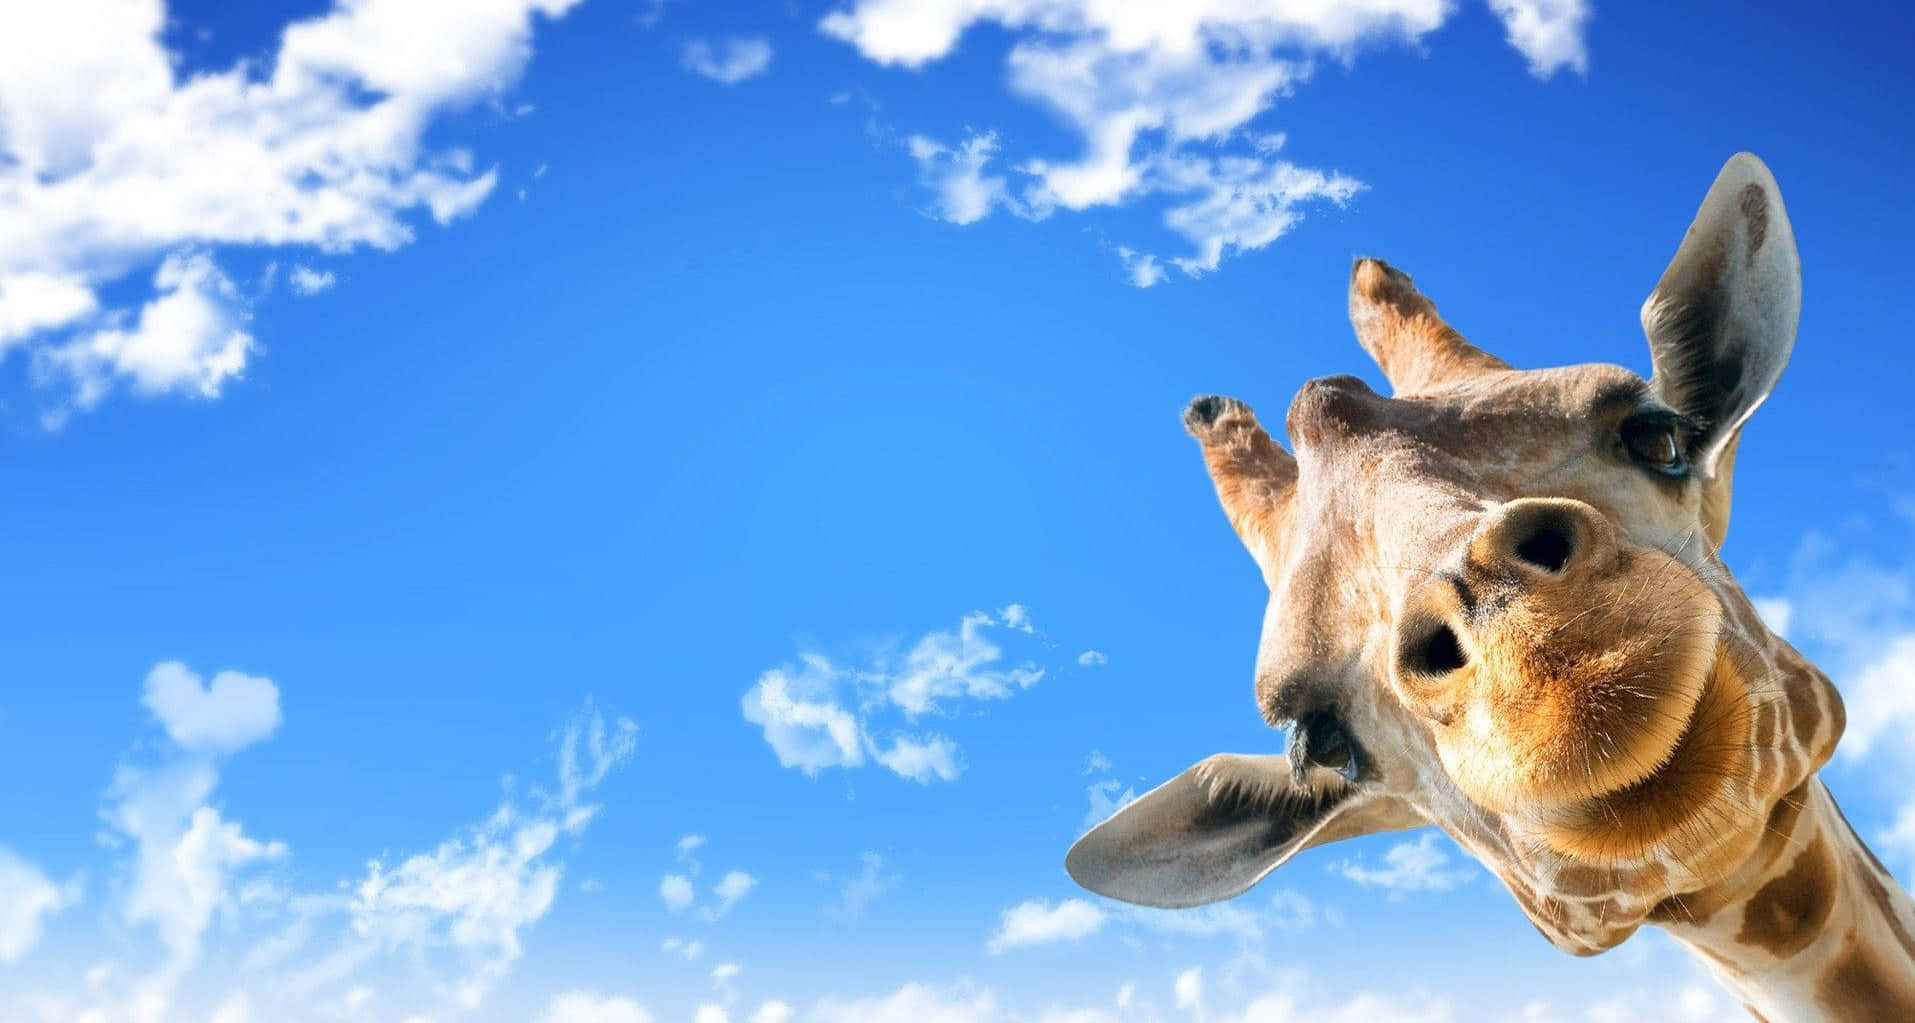 A majestic, long-necked giraffe looks up at the bright blue sky